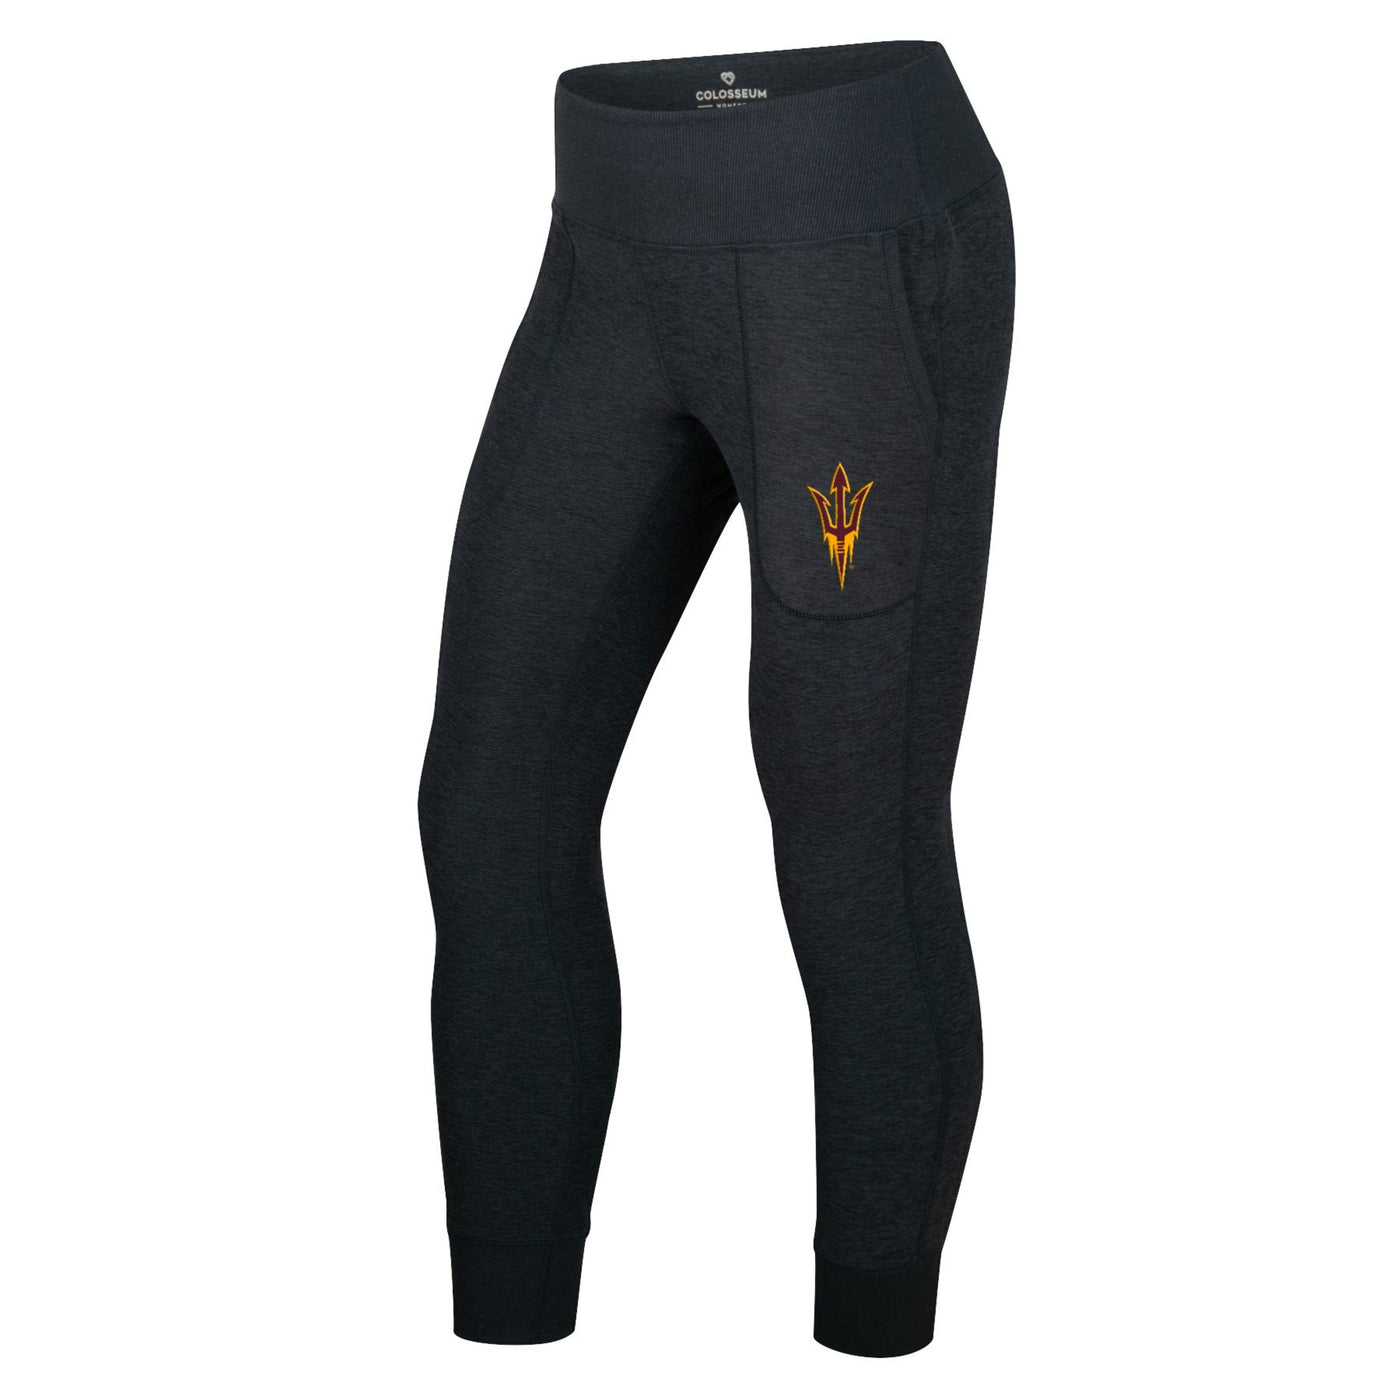 ASU black women's joggers with a pitchfork logo in maroon outlined in gold on the pocket.